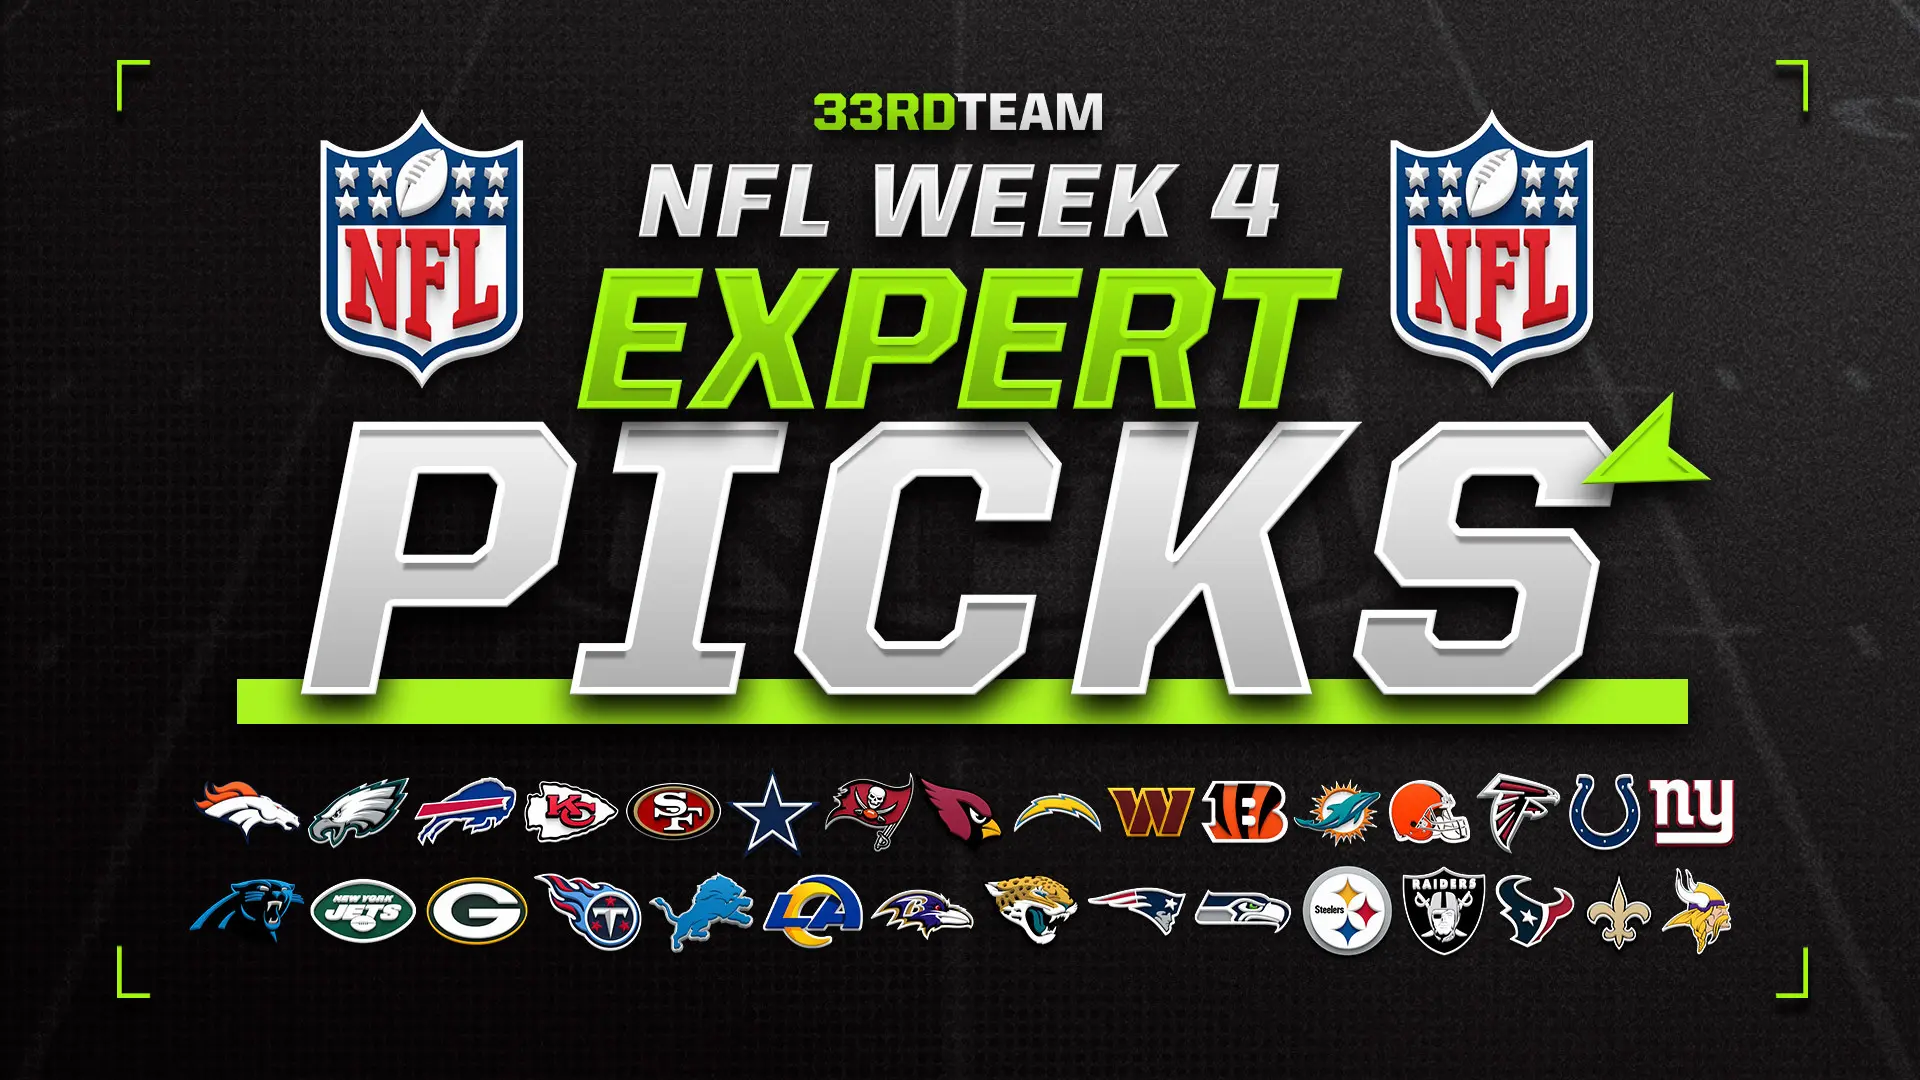 Picks for EVERY BIG Week 12 NFL Game